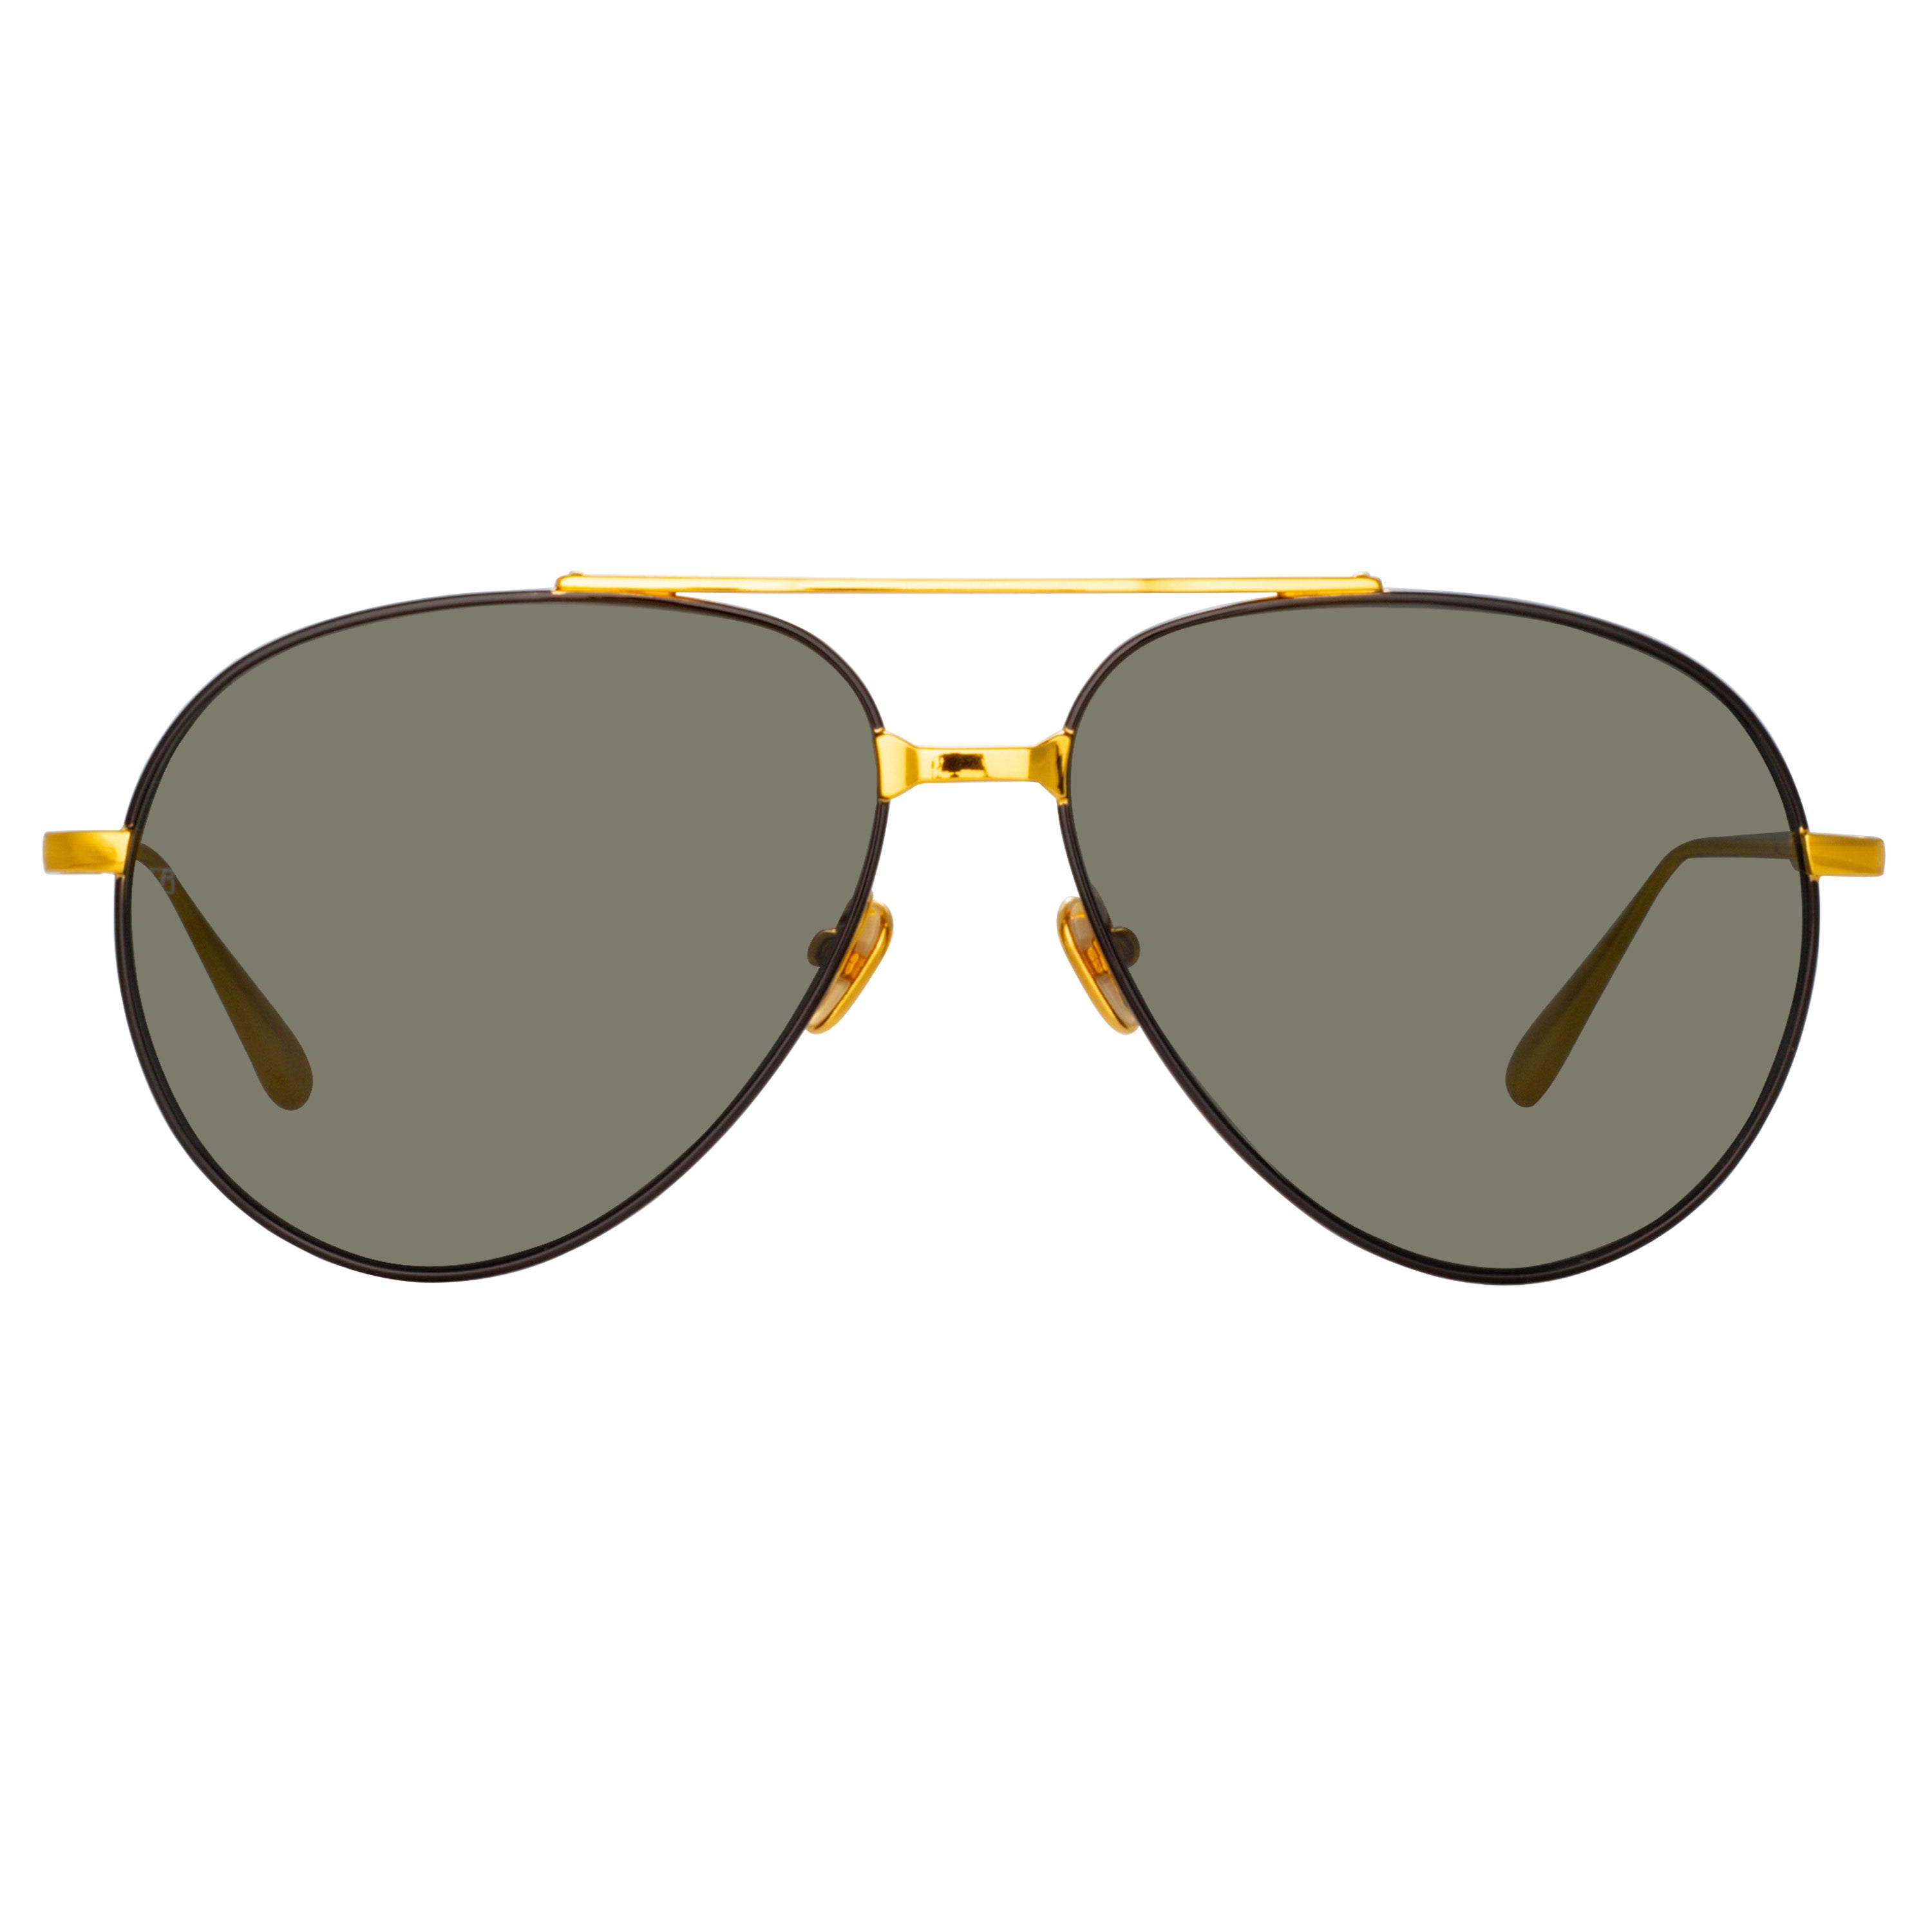 Men’s Marcelo Aviator Sunglasses in Black and Yellow Gold